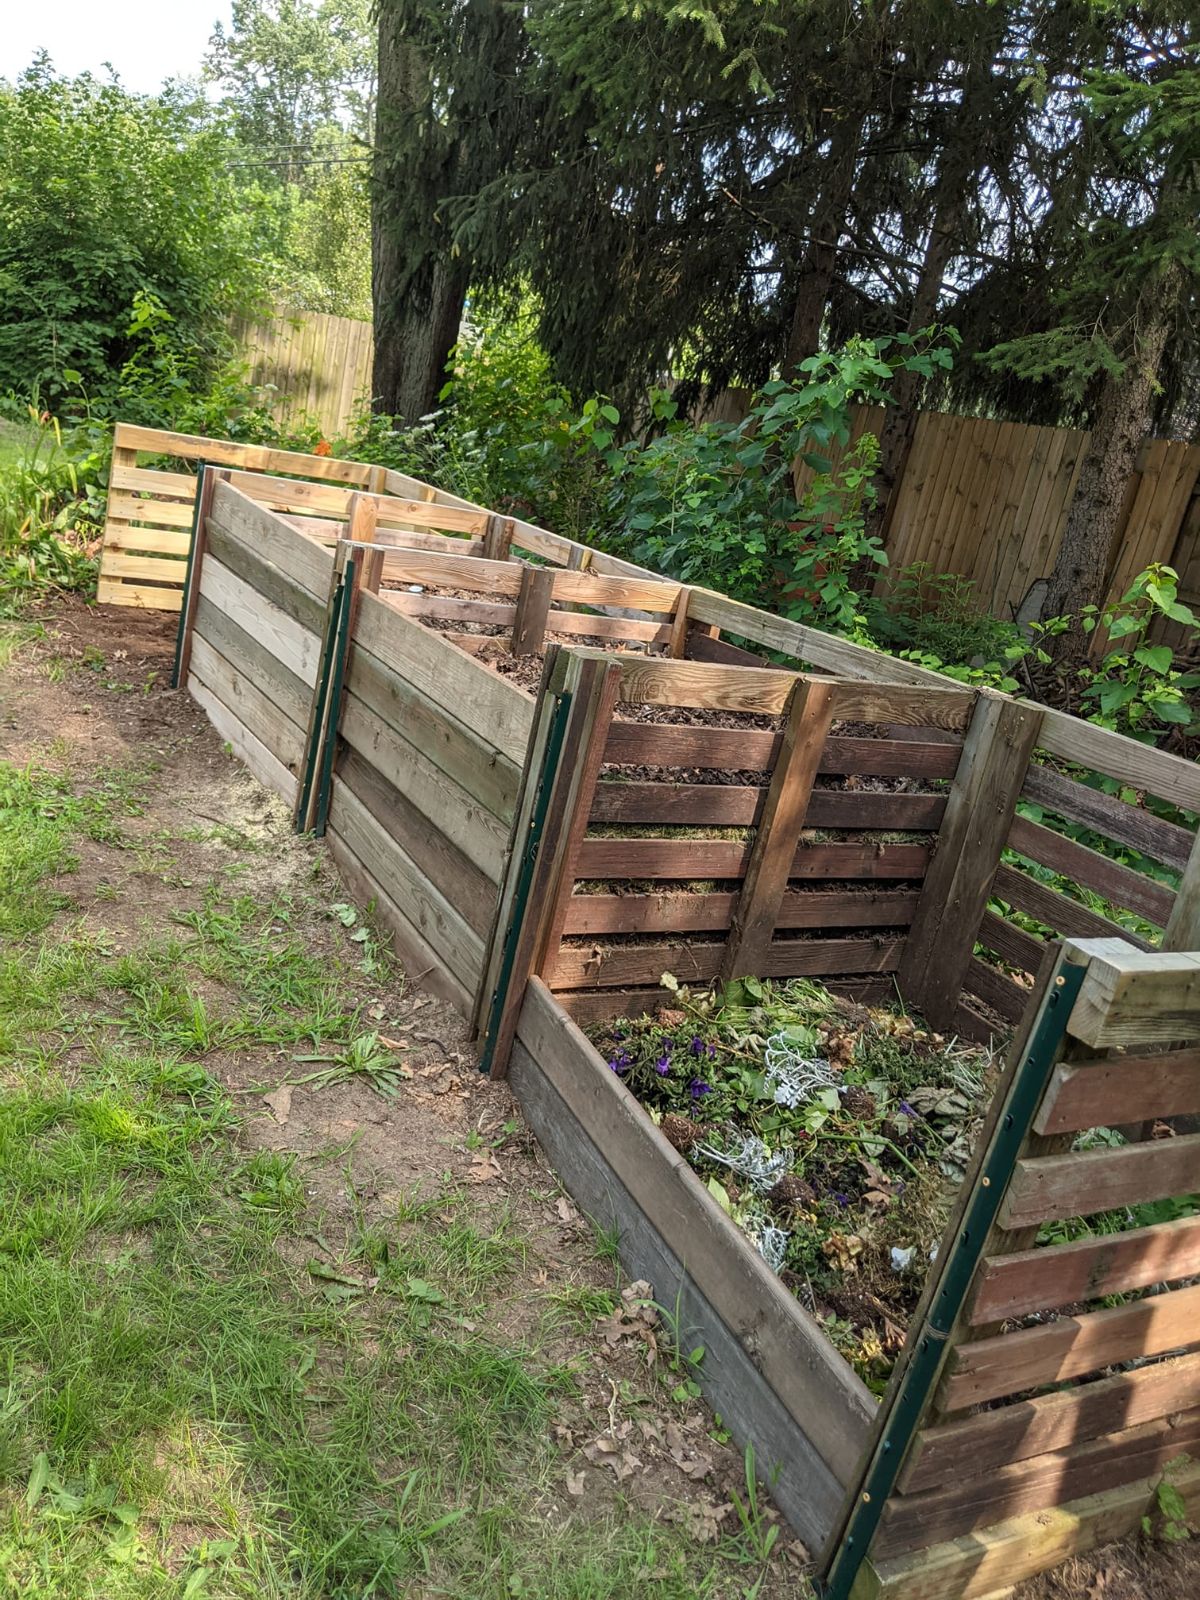 Four wooden compost bins, two ready to use and two hot bins; Photo courtesy of Cheryl Spieldenner 